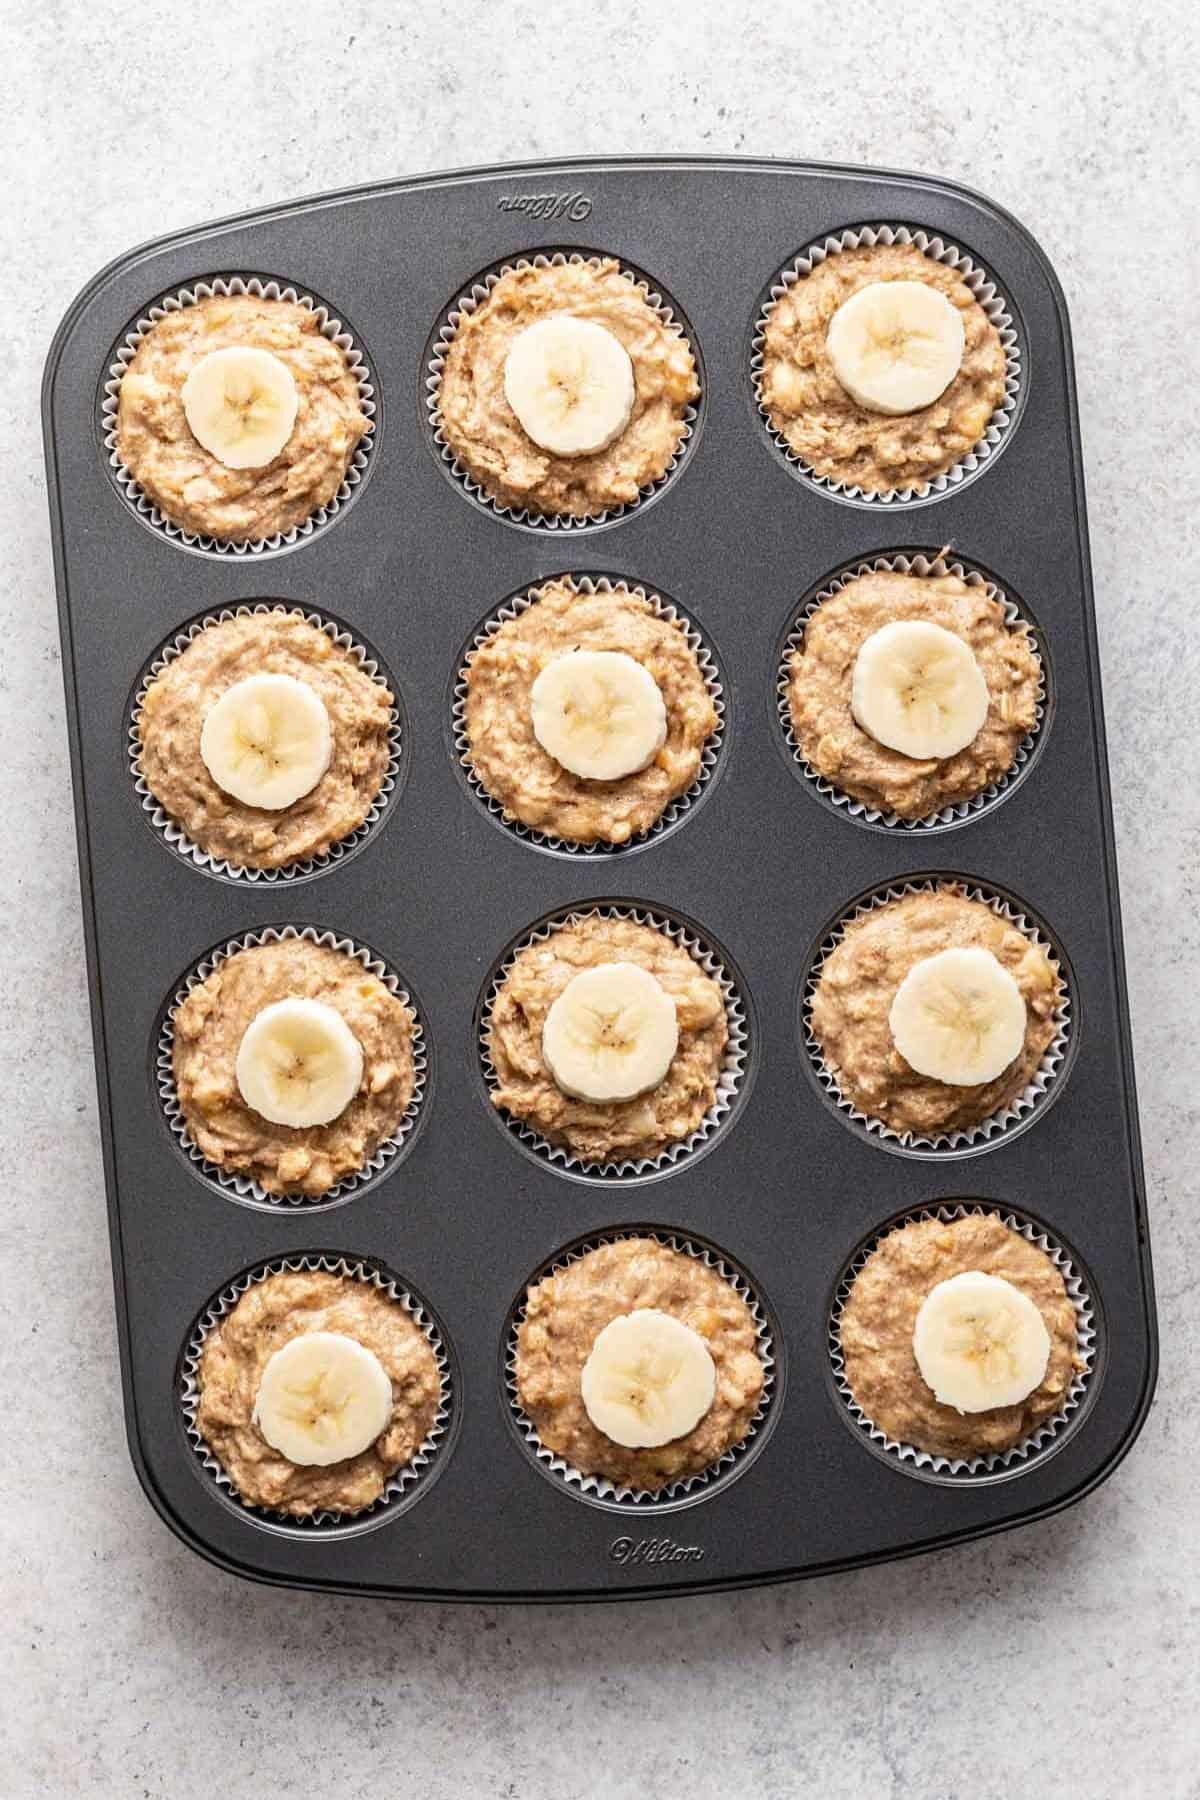 Unbaked muffins in muffin tin topped with a thin slice of banana.